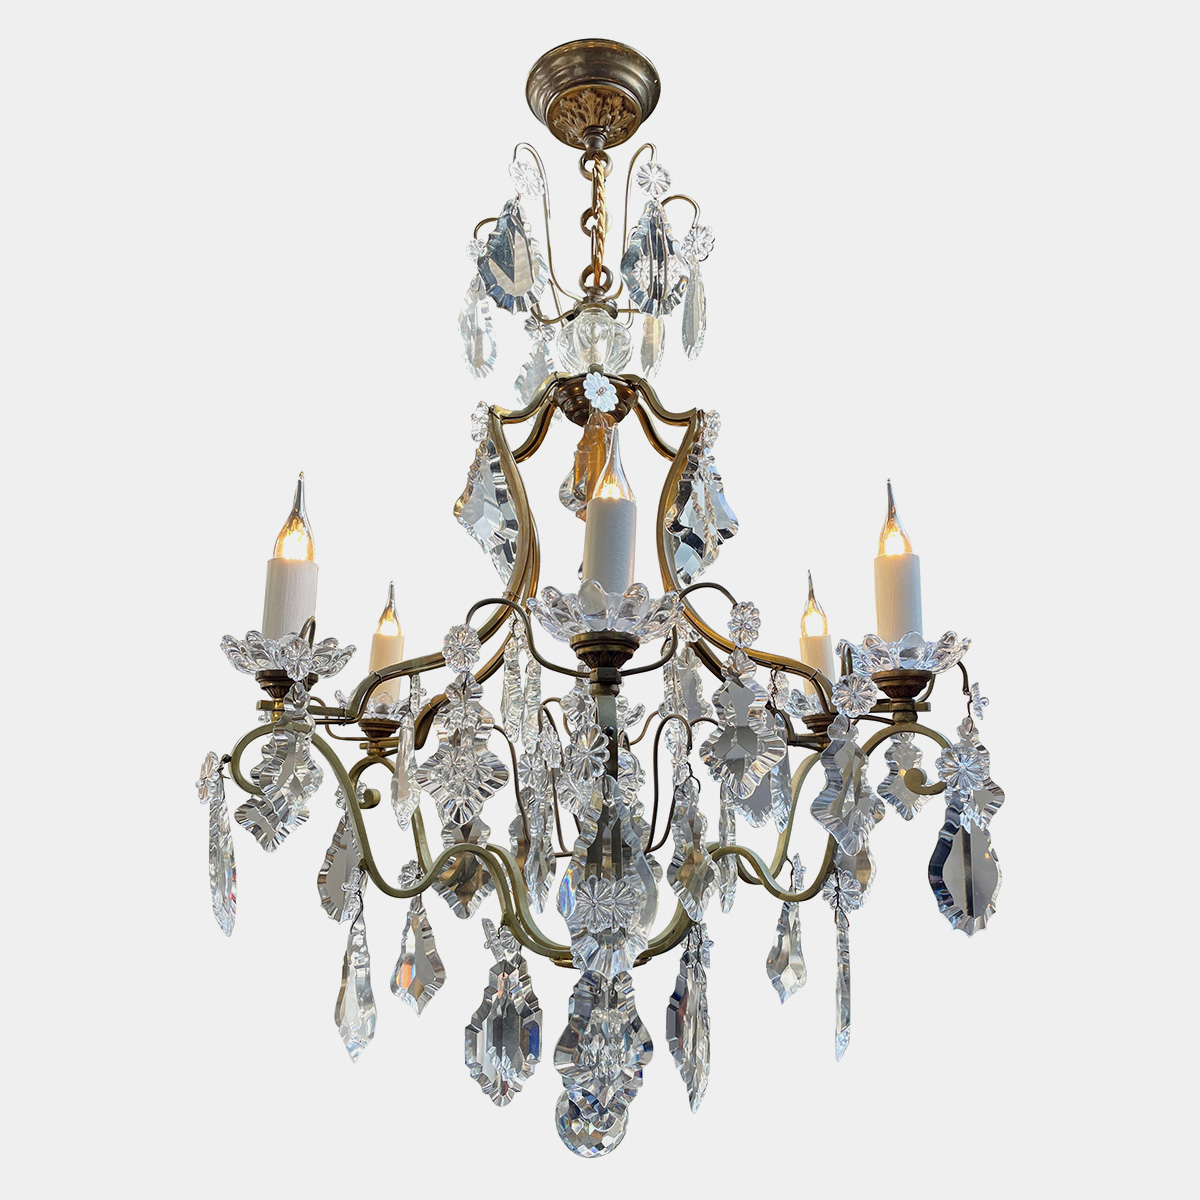 An Antique French Brass and Crystal Cage Chandelier